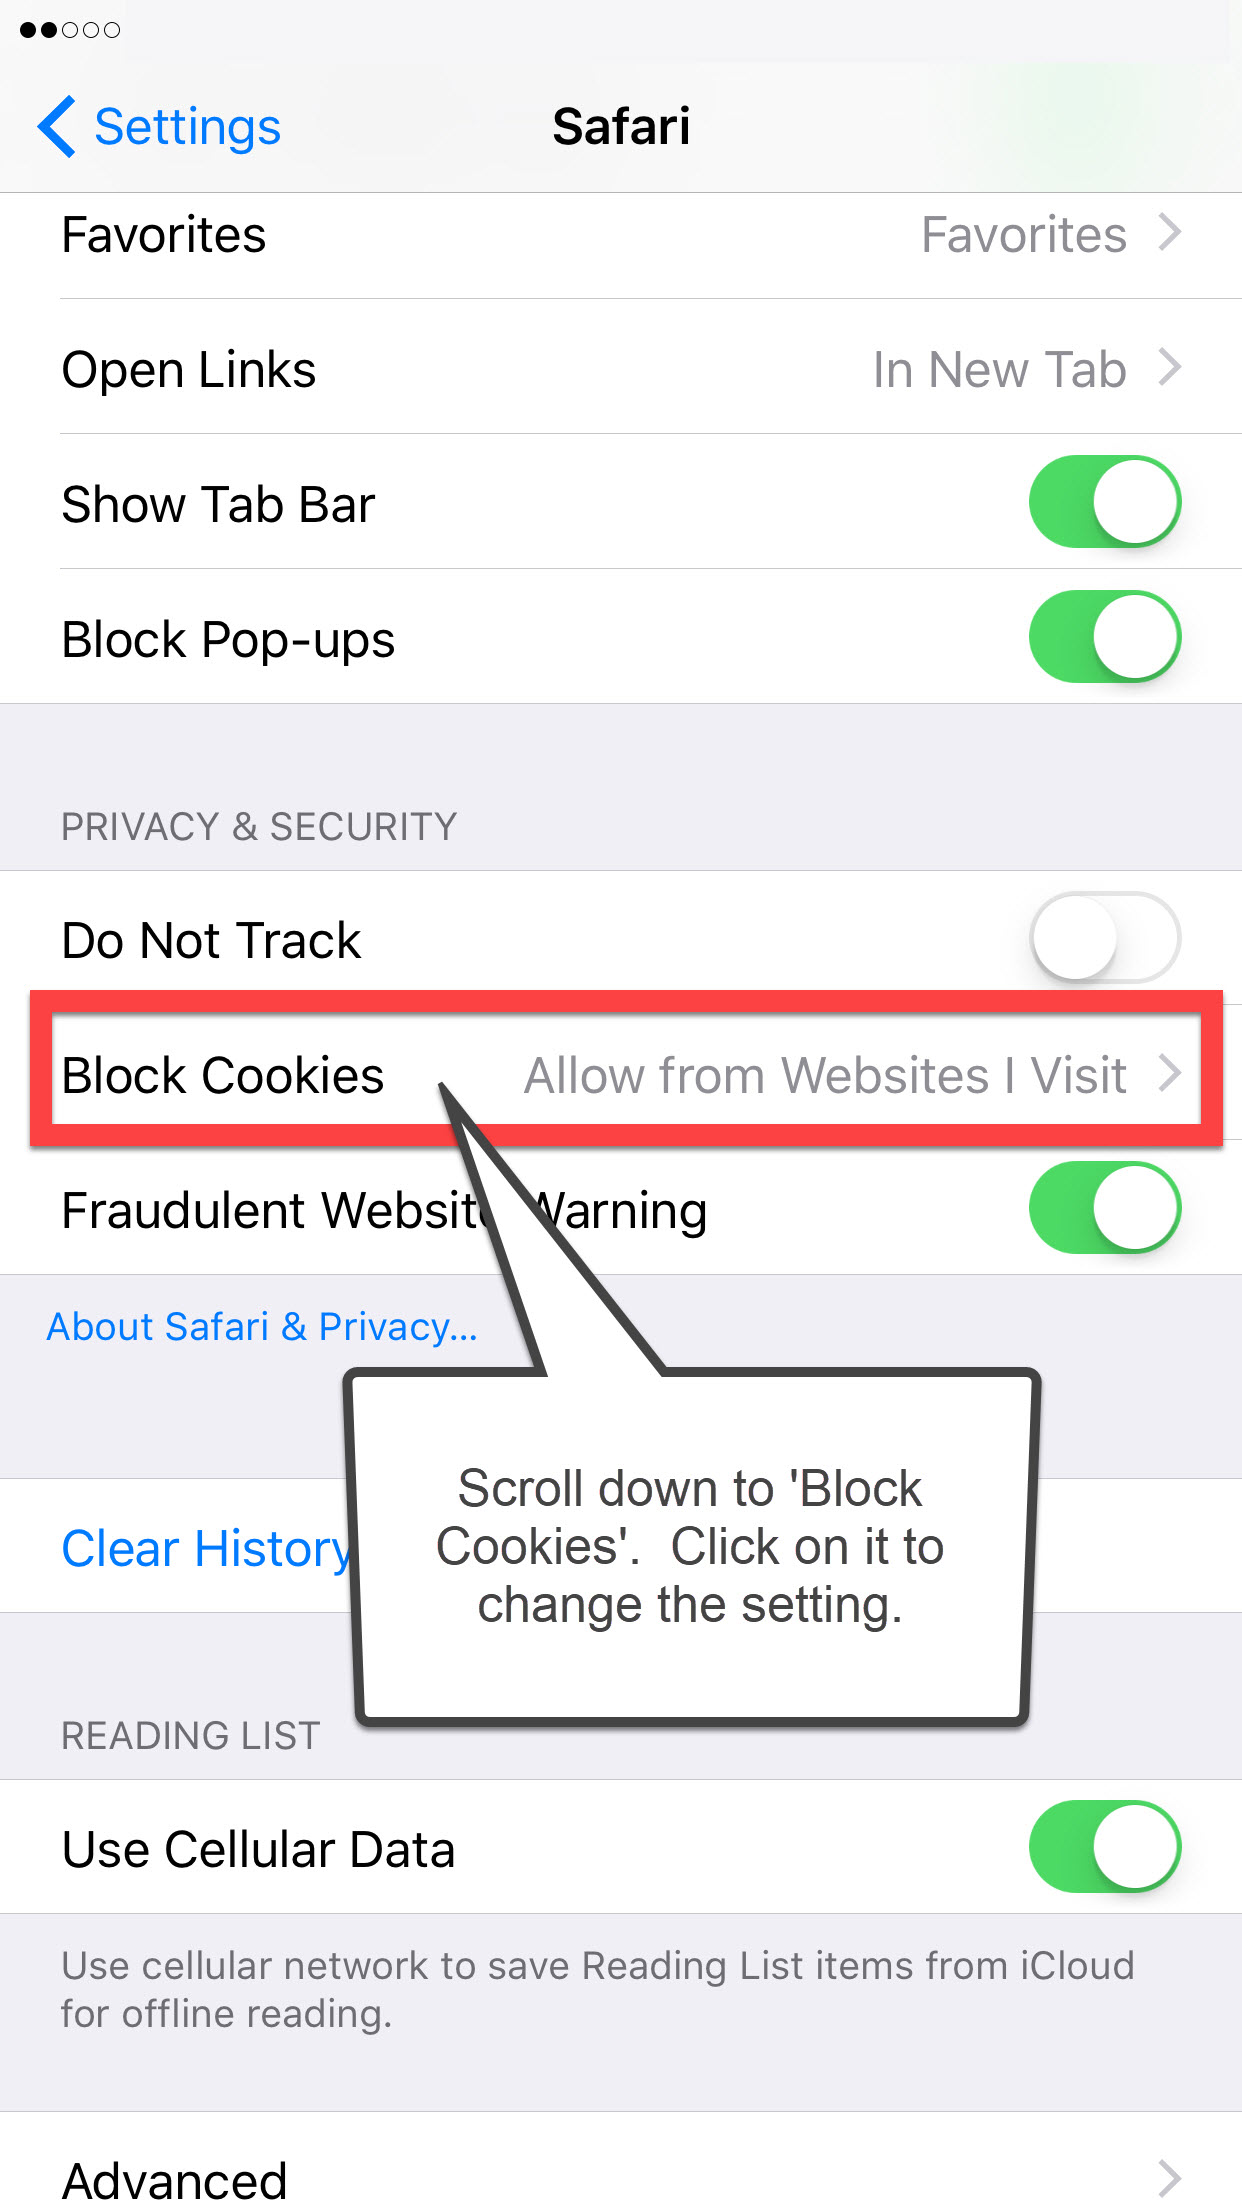 download the new version for ios Cookie